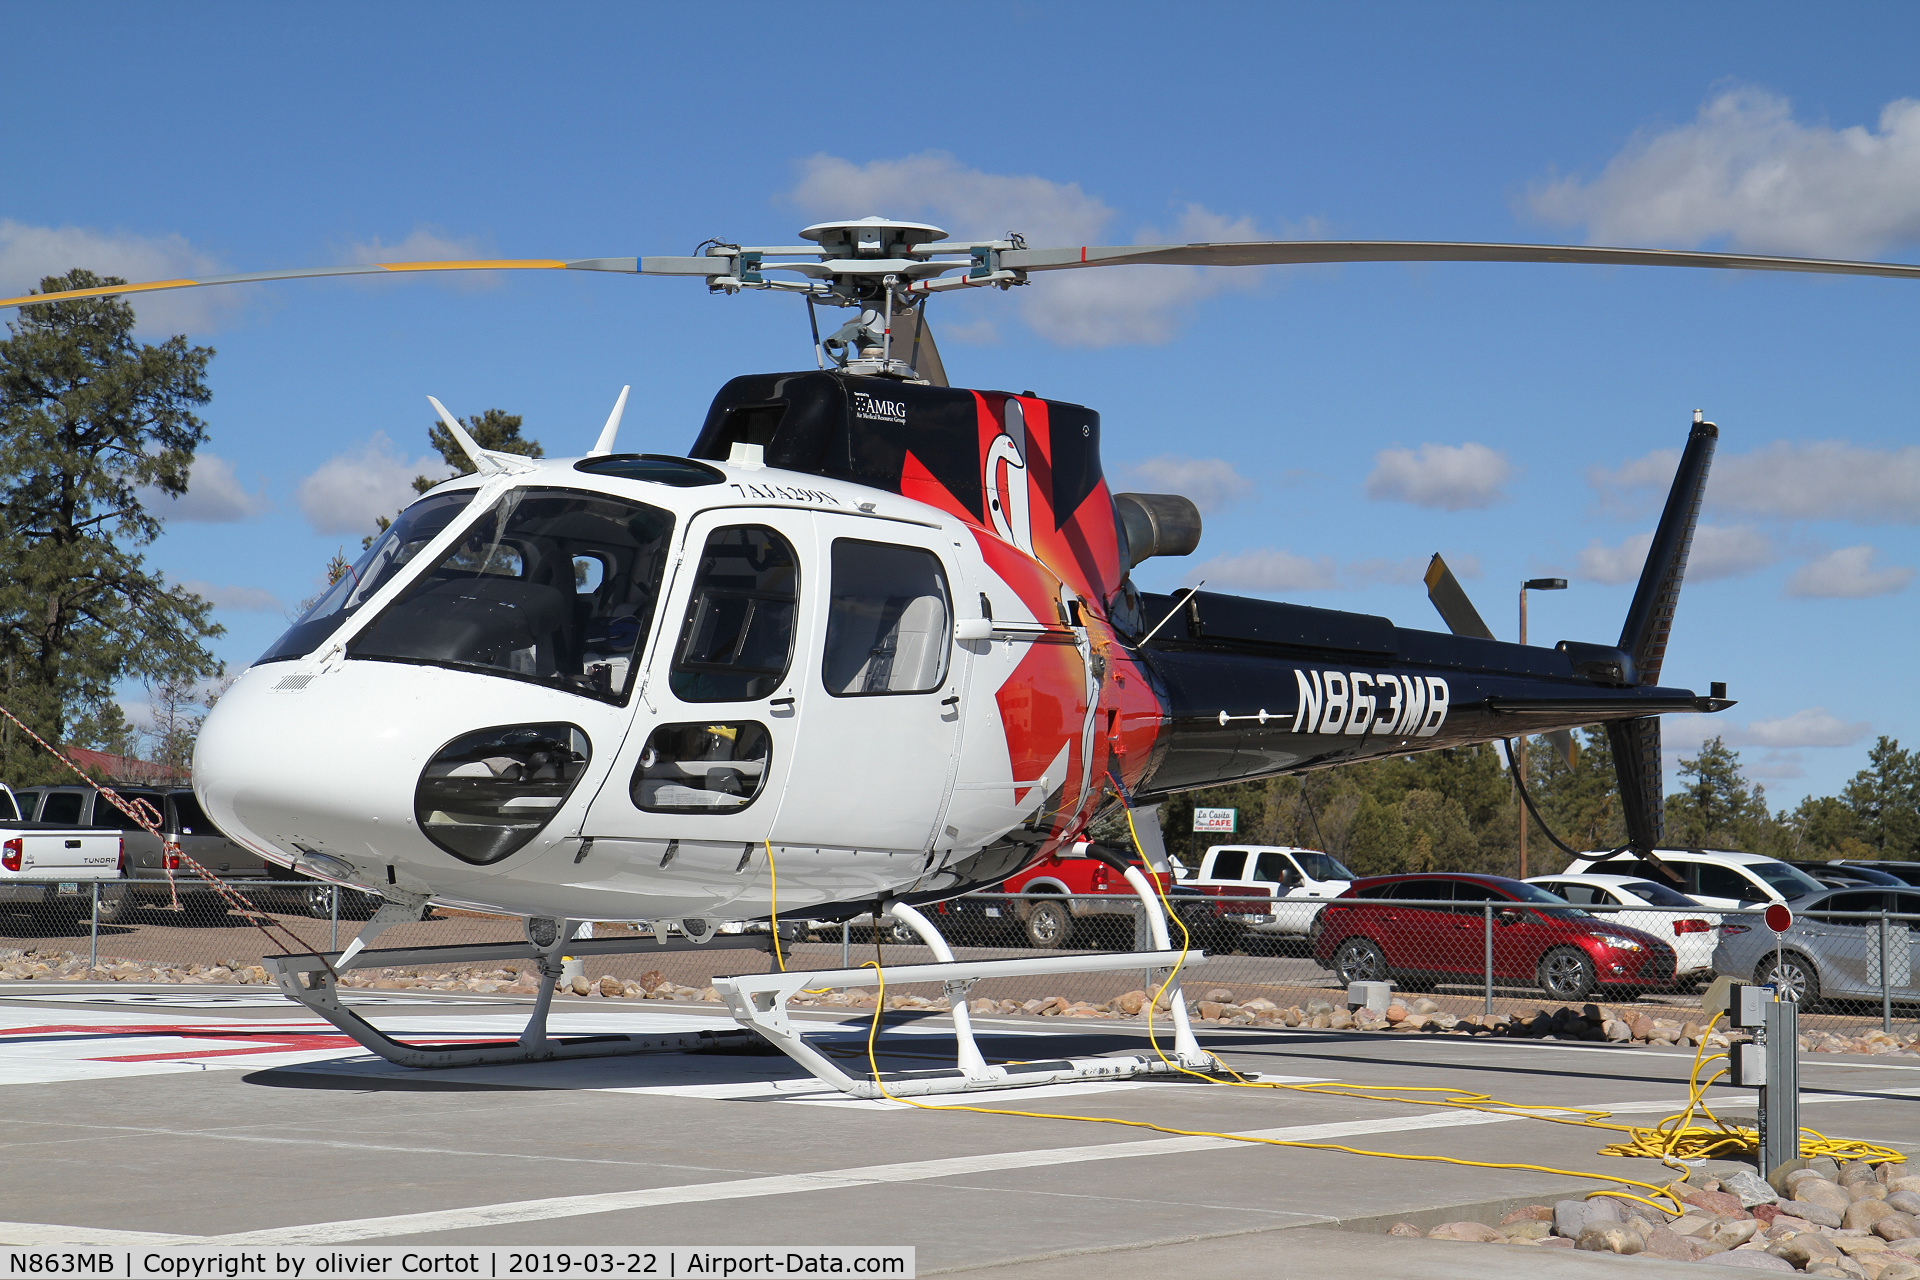 N863MB, 2014 Airbus Helicopters AS-350B-3 Ecureuil C/N 7814, march 2019